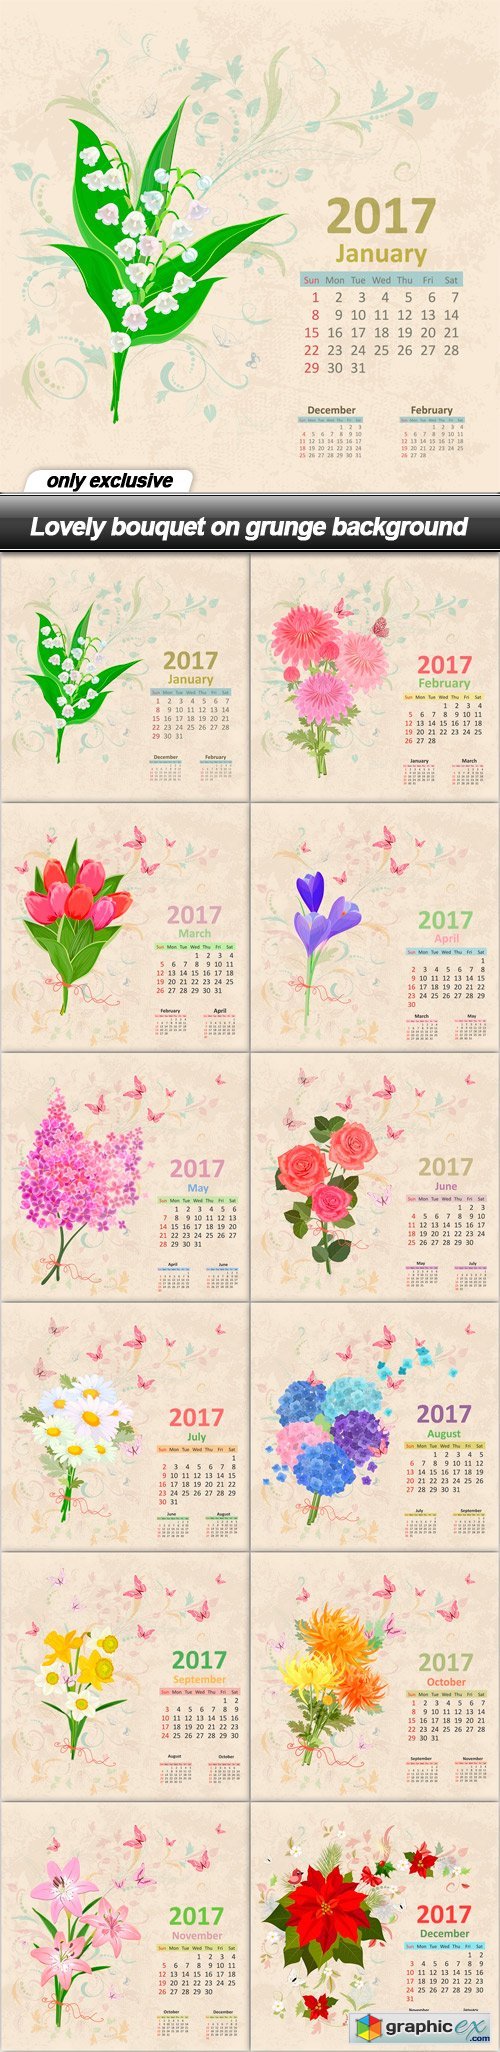 Lovely bouquet on grunge background - 12 EPS